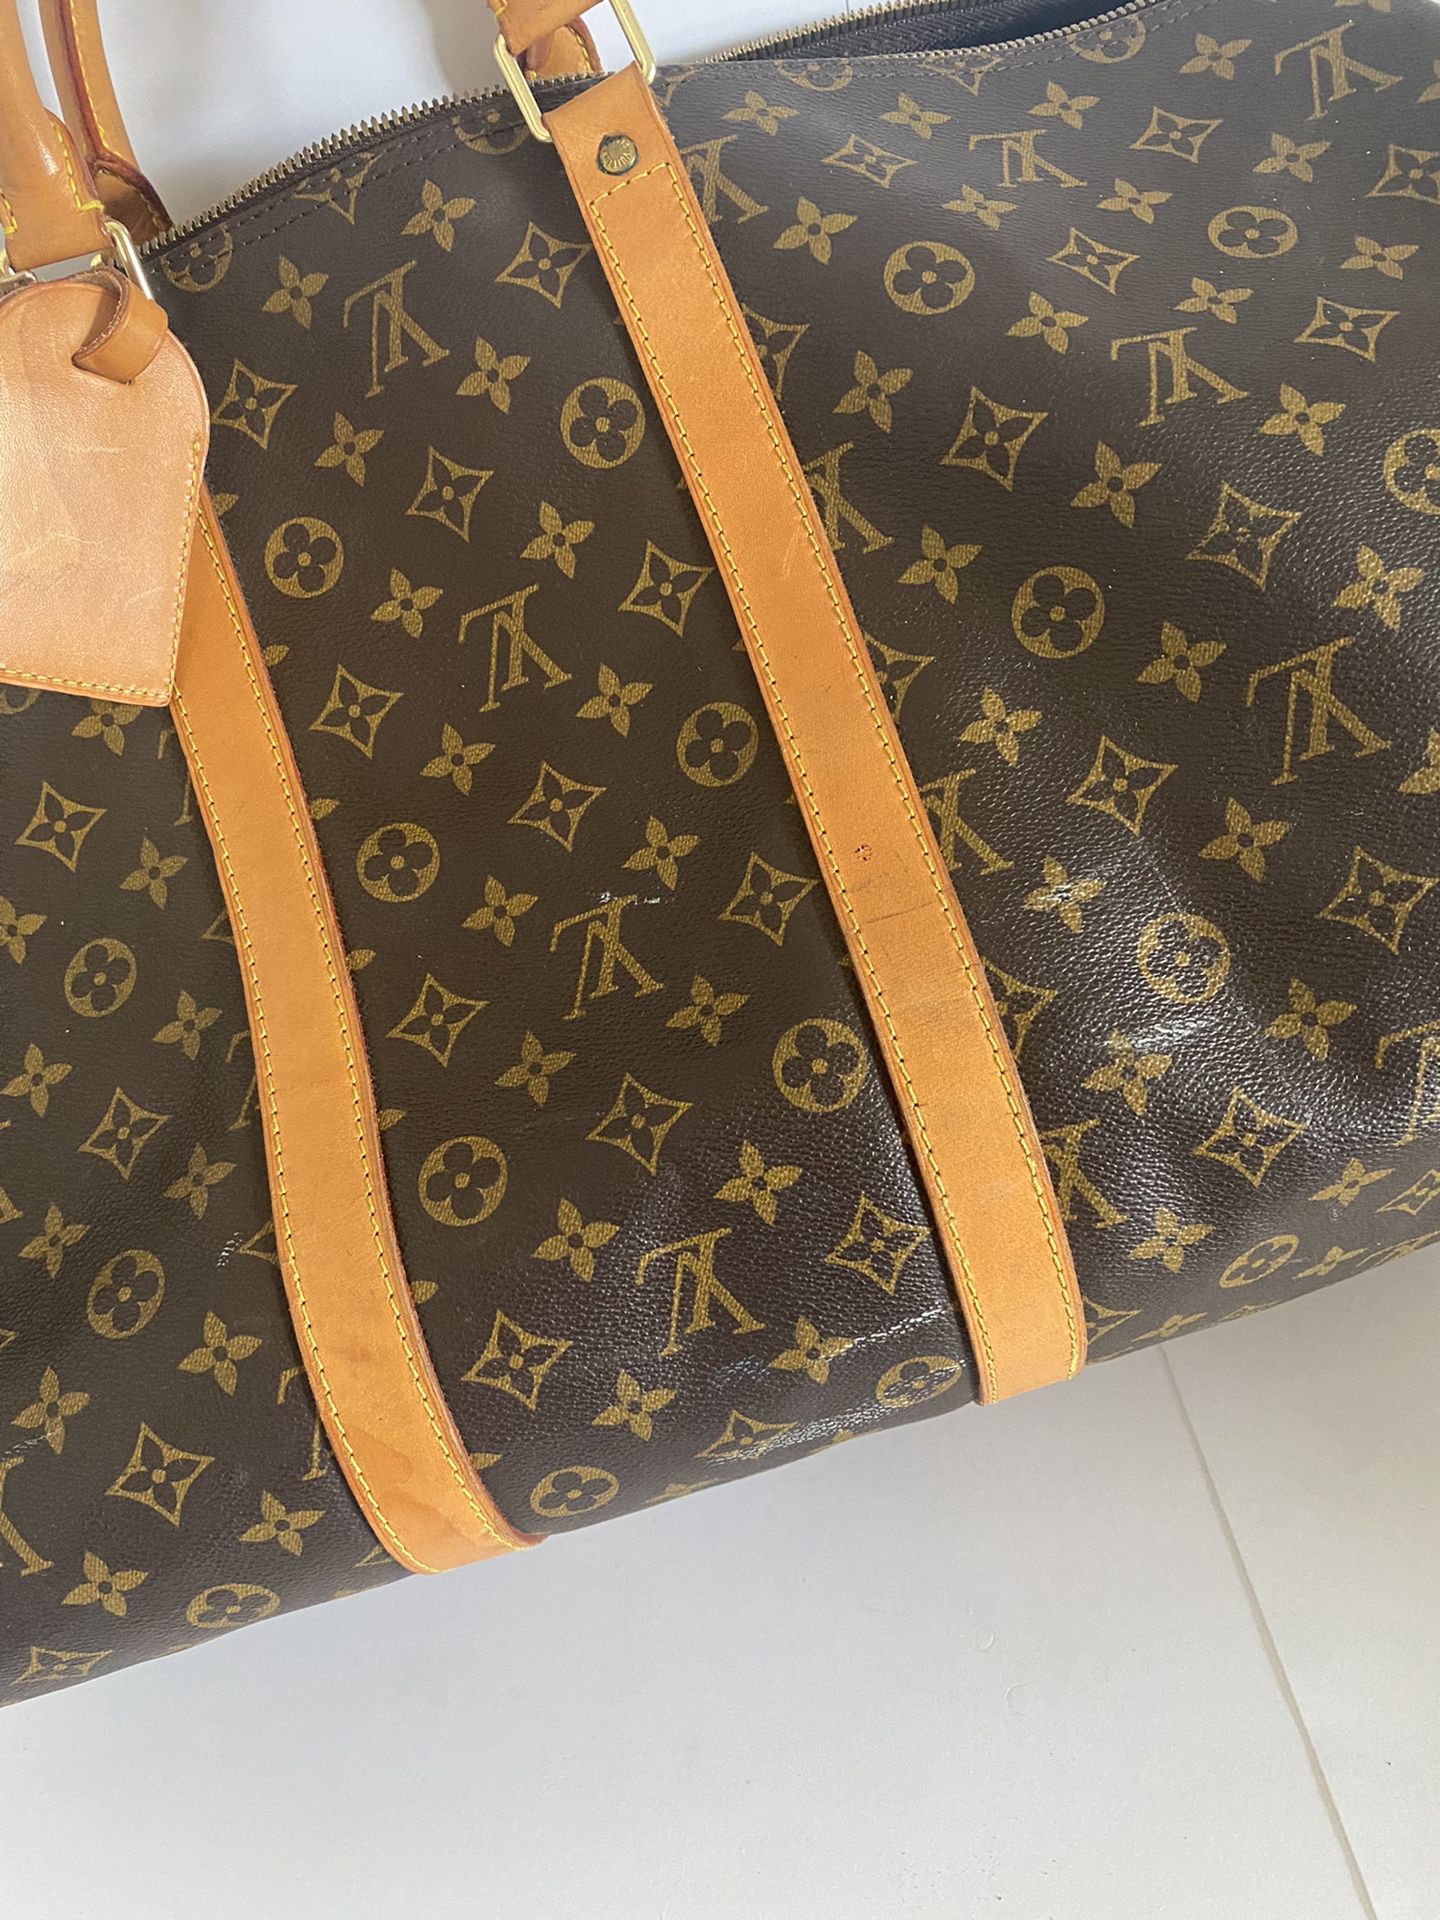 Louis Vuitton 55 Keepall Bag for Sale in Fort Lauderdale, FL - OfferUp